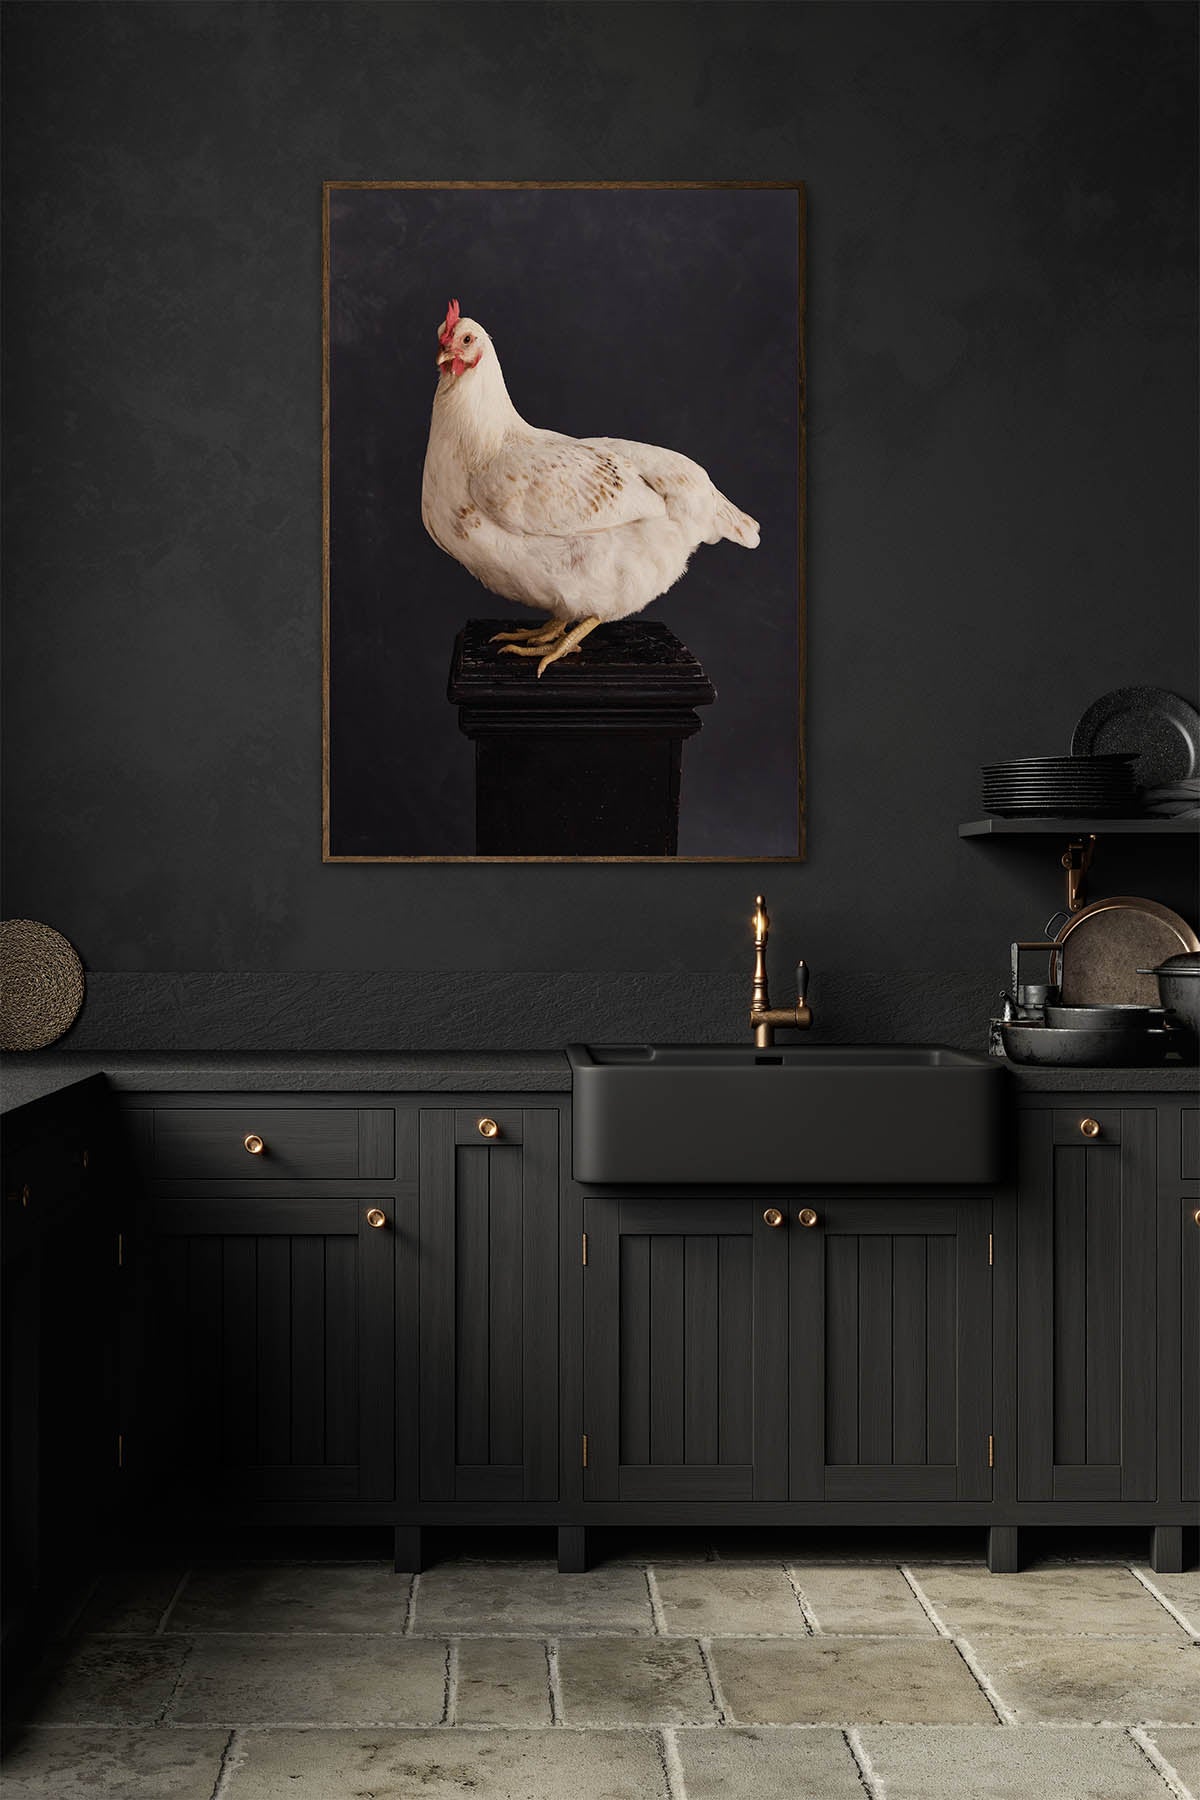 Fine Art Print Of A White Chicken Standing On A Black Plinth With A Black Background Framed On A Wall In An European Style Kitchen with a Trough Sink and Brass Tap.